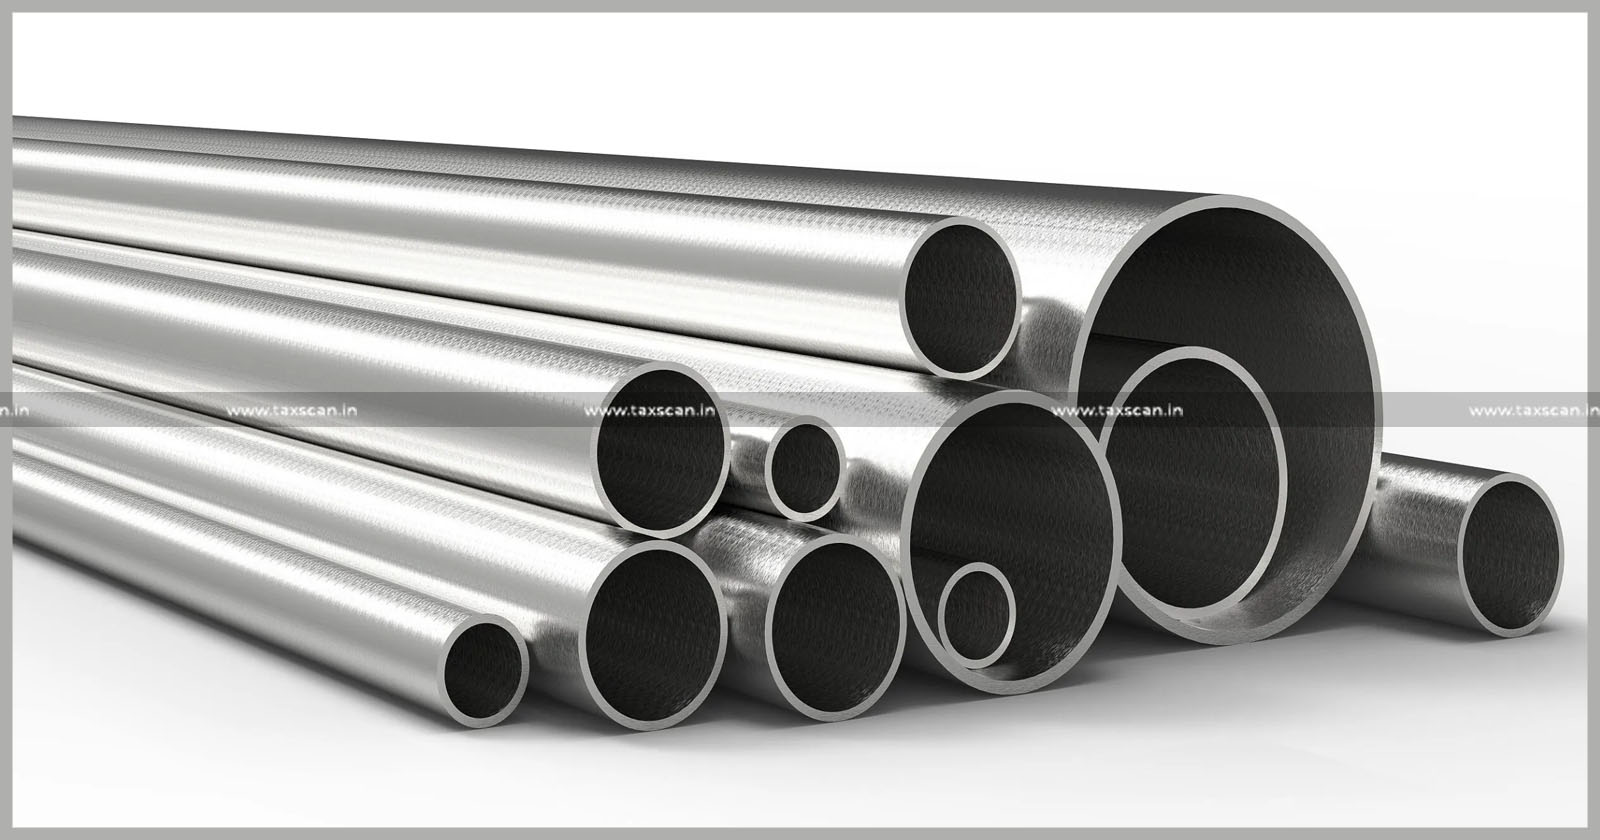 CESTAT Quashes Classification of Stainless Steel Tube - CESTAT - Stainless Steel Tube - Heading of First Schedule under Customs Tariff Act - Customs Tariff Act on ground of Wrong Classification - Taxscan